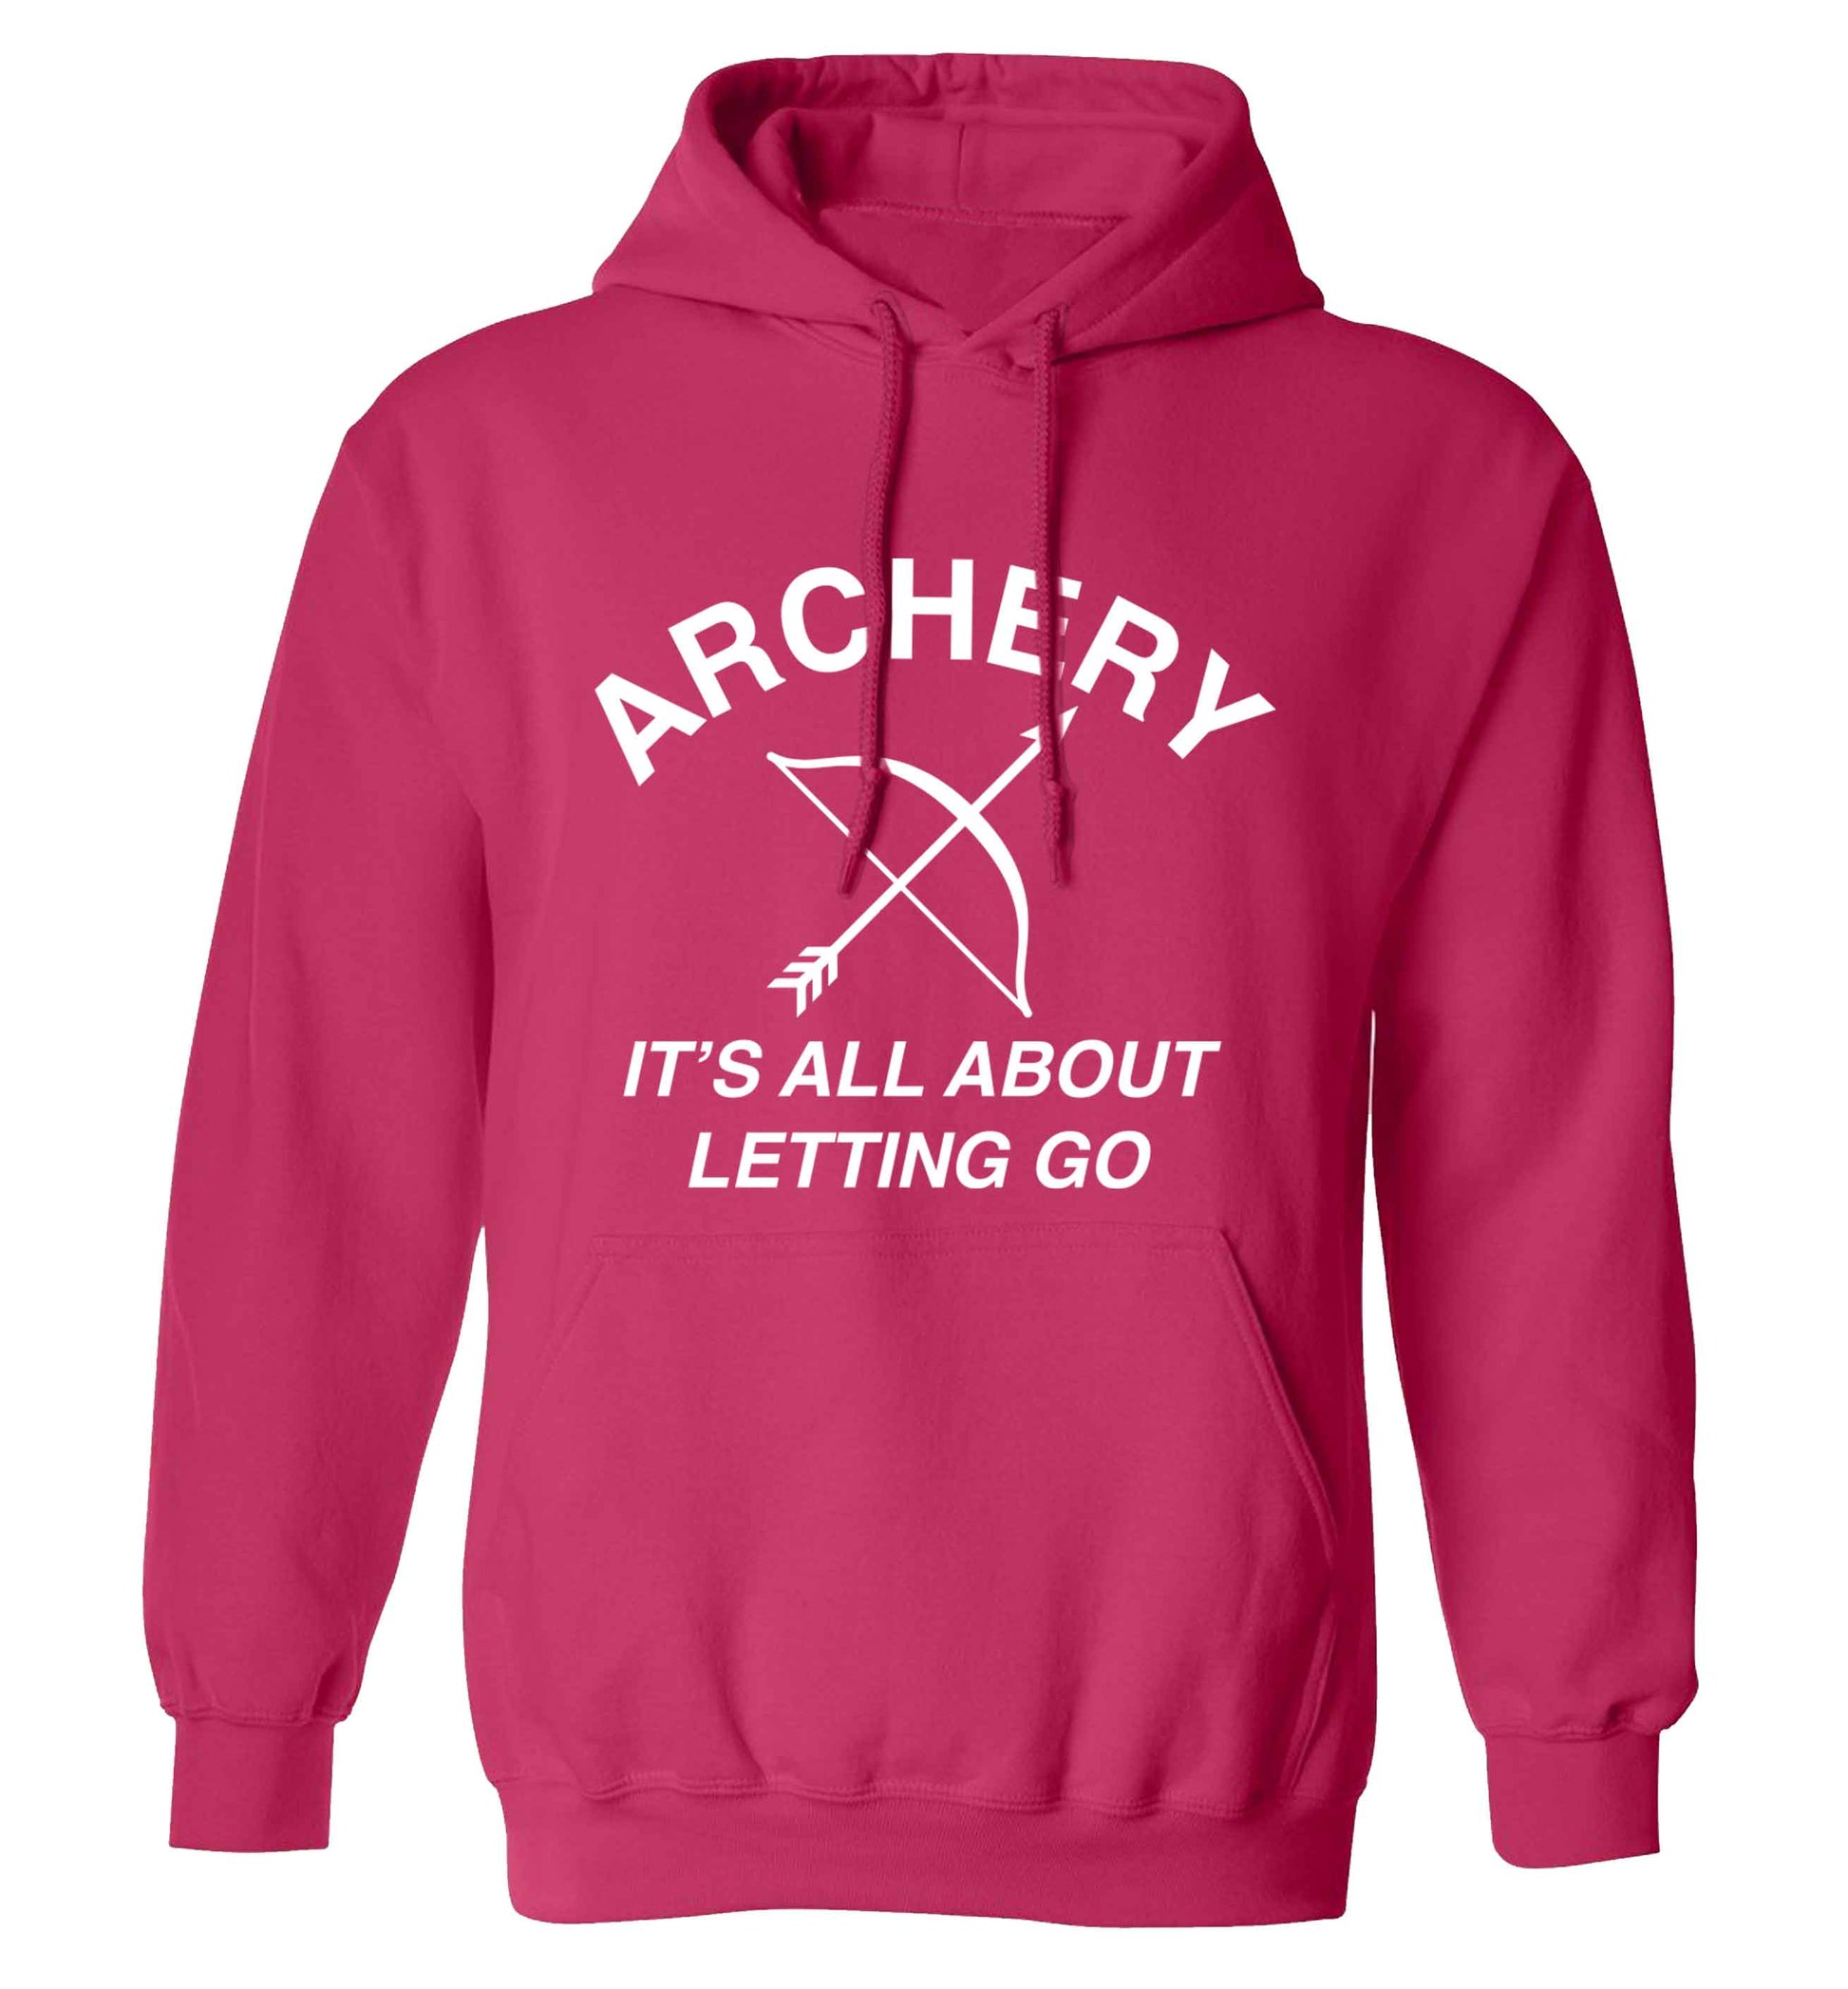 Archery it's all about letting go adults unisex pink hoodie 2XL